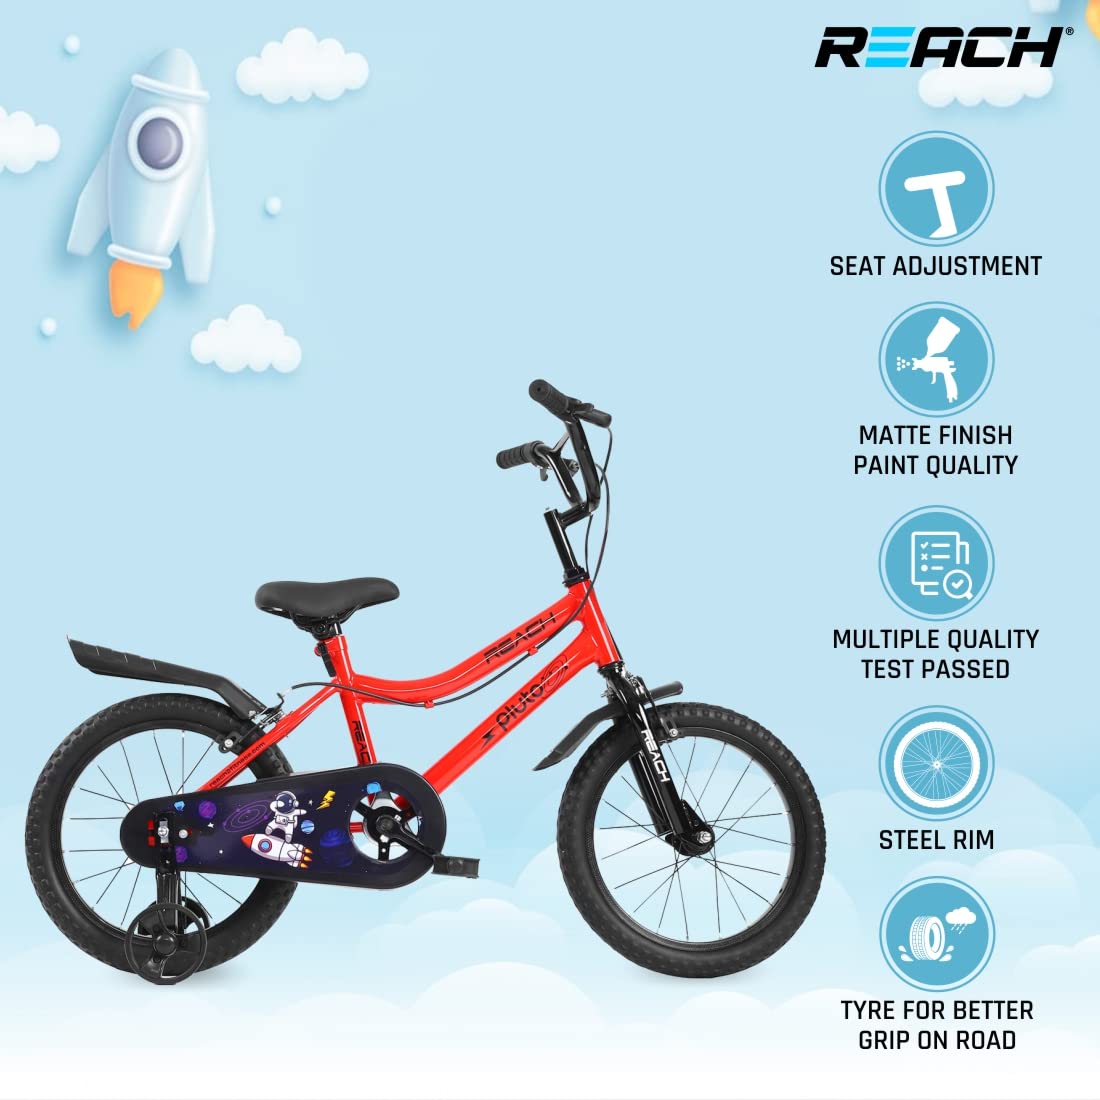 Reach Pluto Kids Cycle 16T with Training Wheels | for Boys and Girls | 90% Assembled | Frame Size: 12" | Ideal for Height: 3 ft 8 inch+ | Ideal for Ages 4-8 Years